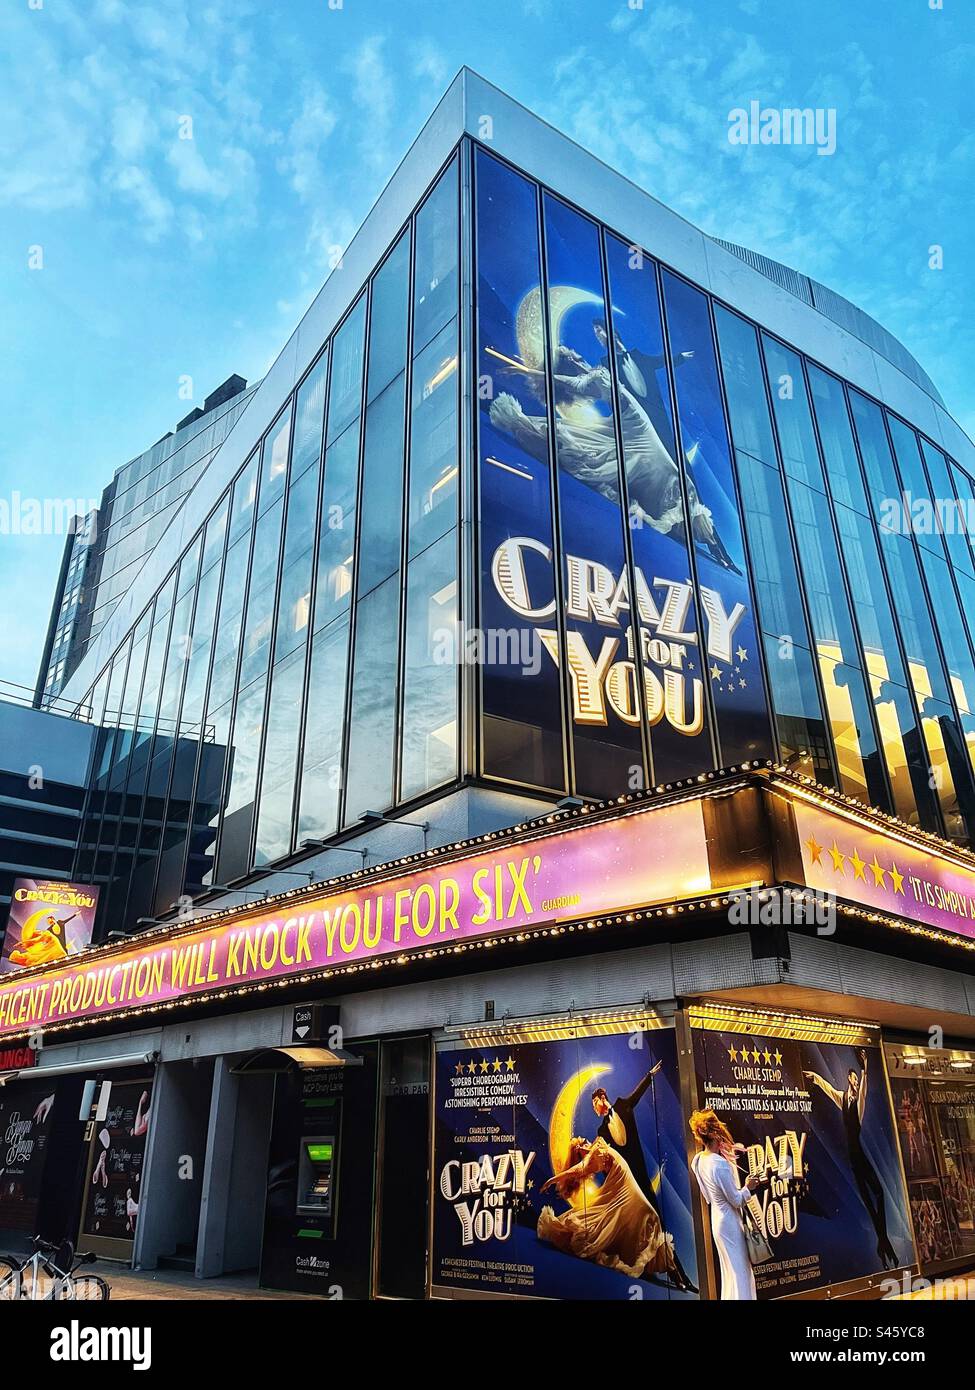 Crazy For You Tickets, Gillian Lynne Theatre London